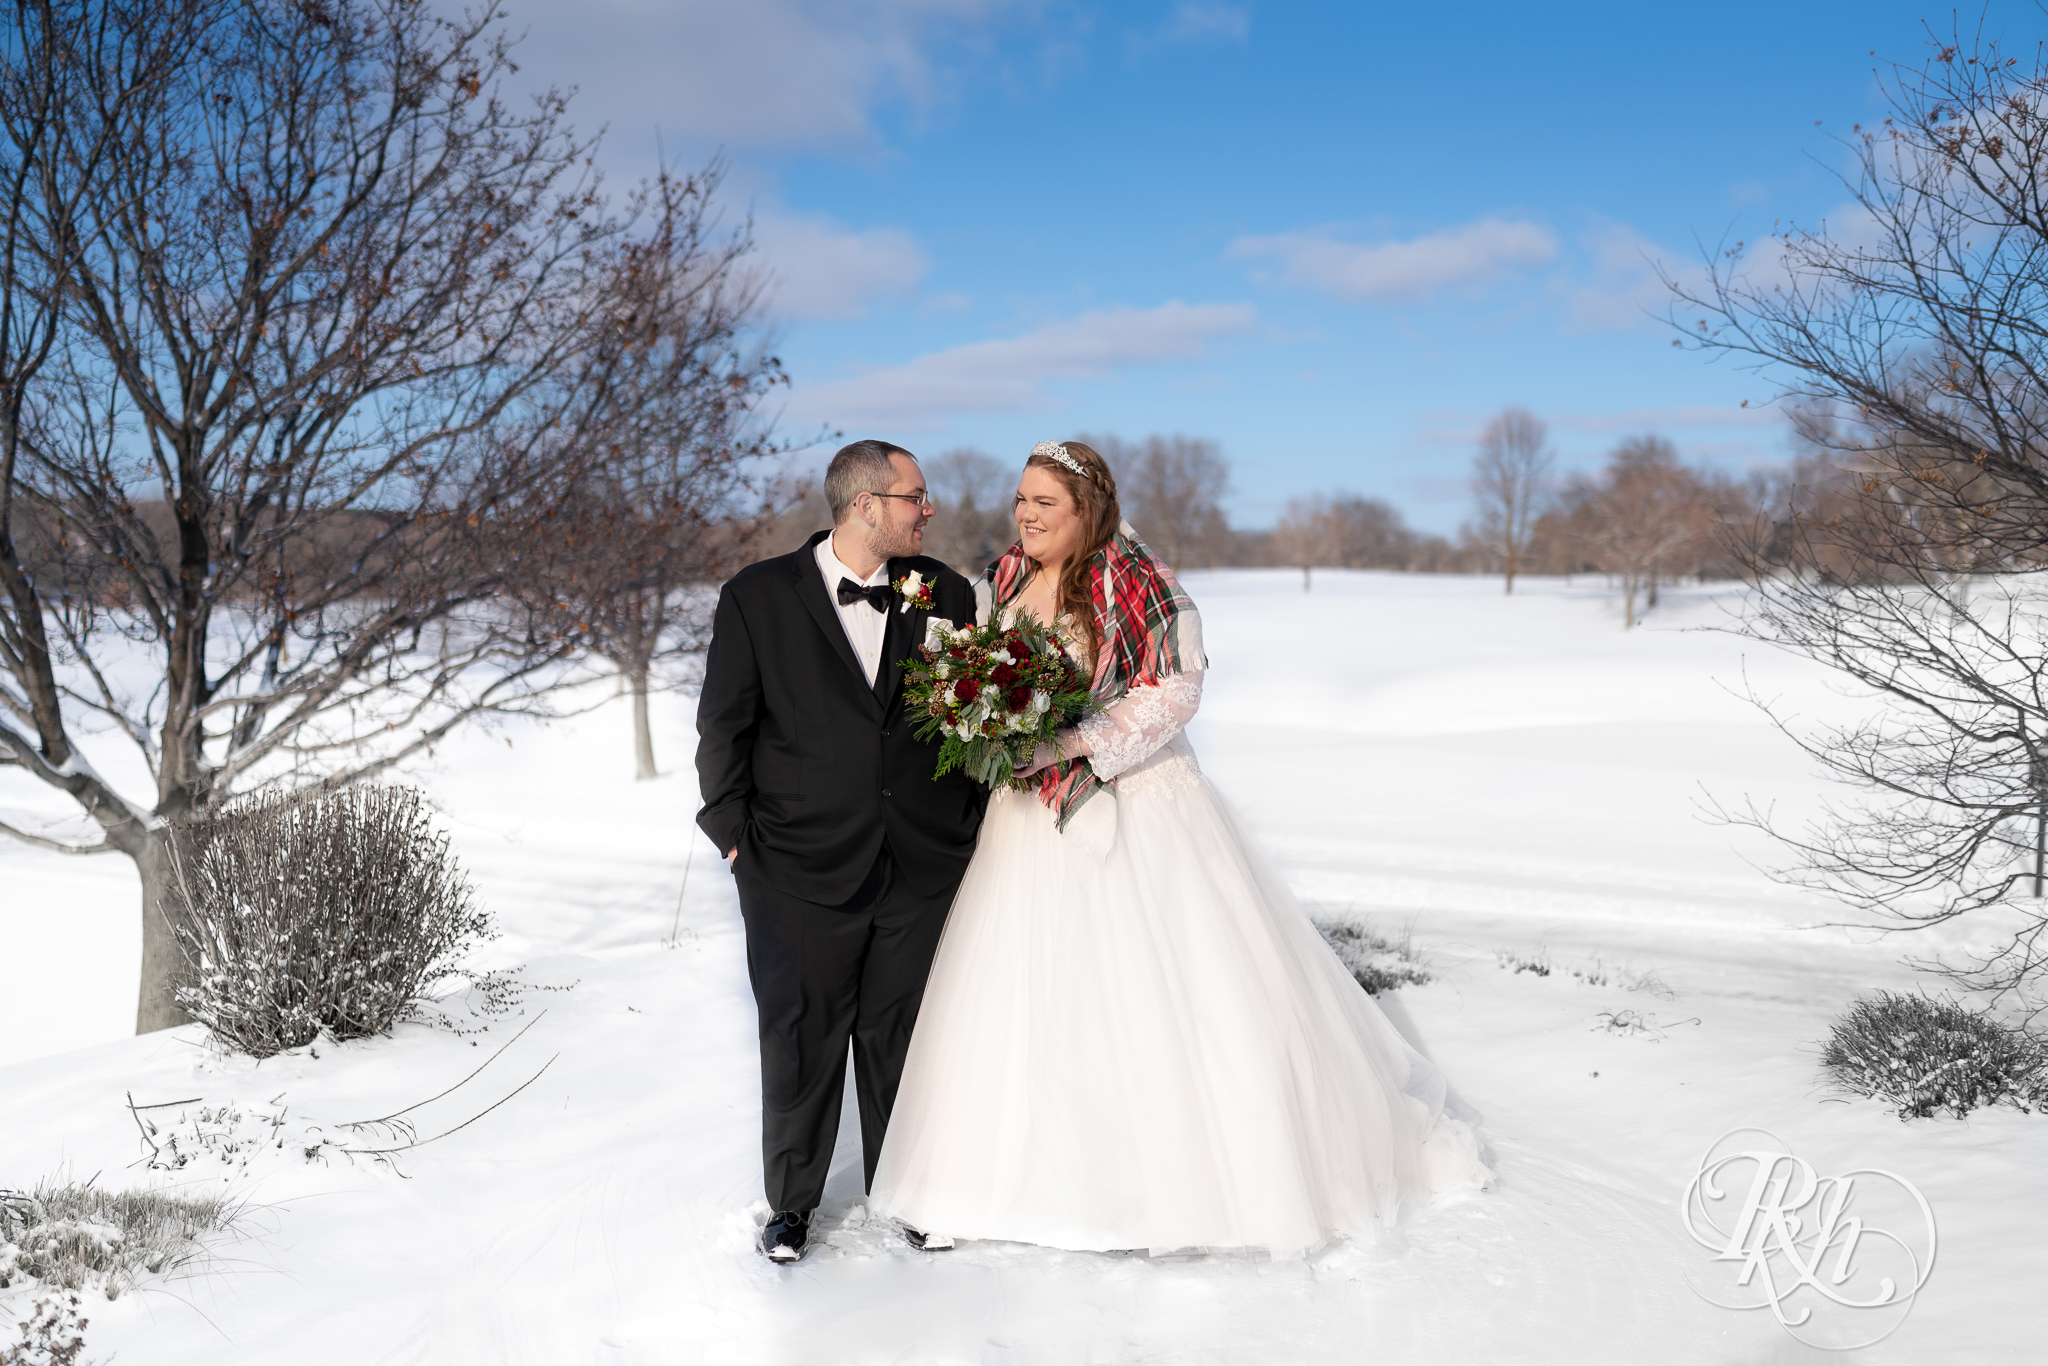 Bride and groom smiling in the snow at Christmas wedding at Oak Glen Golf Course in Stillwater, Minnesota.